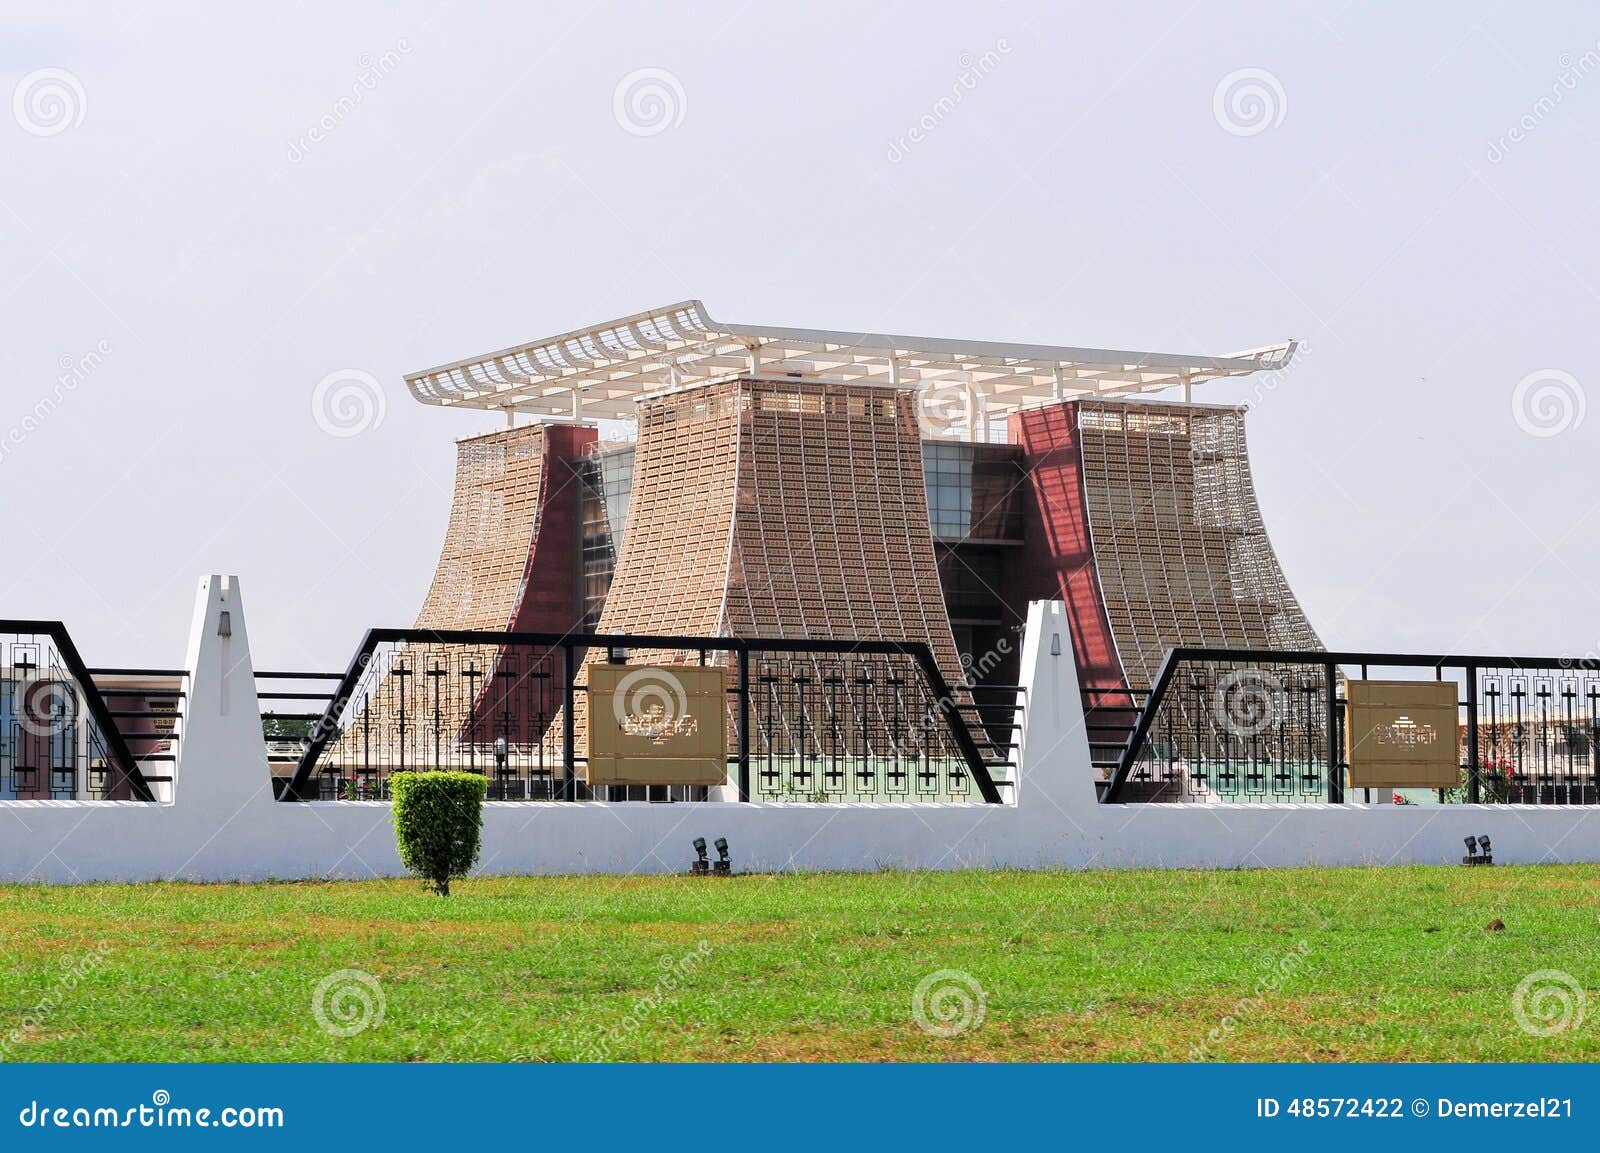 The Flagstaff House - Presidential Palace of Ghana Stock Photo - Image of travel, residence: 48572422